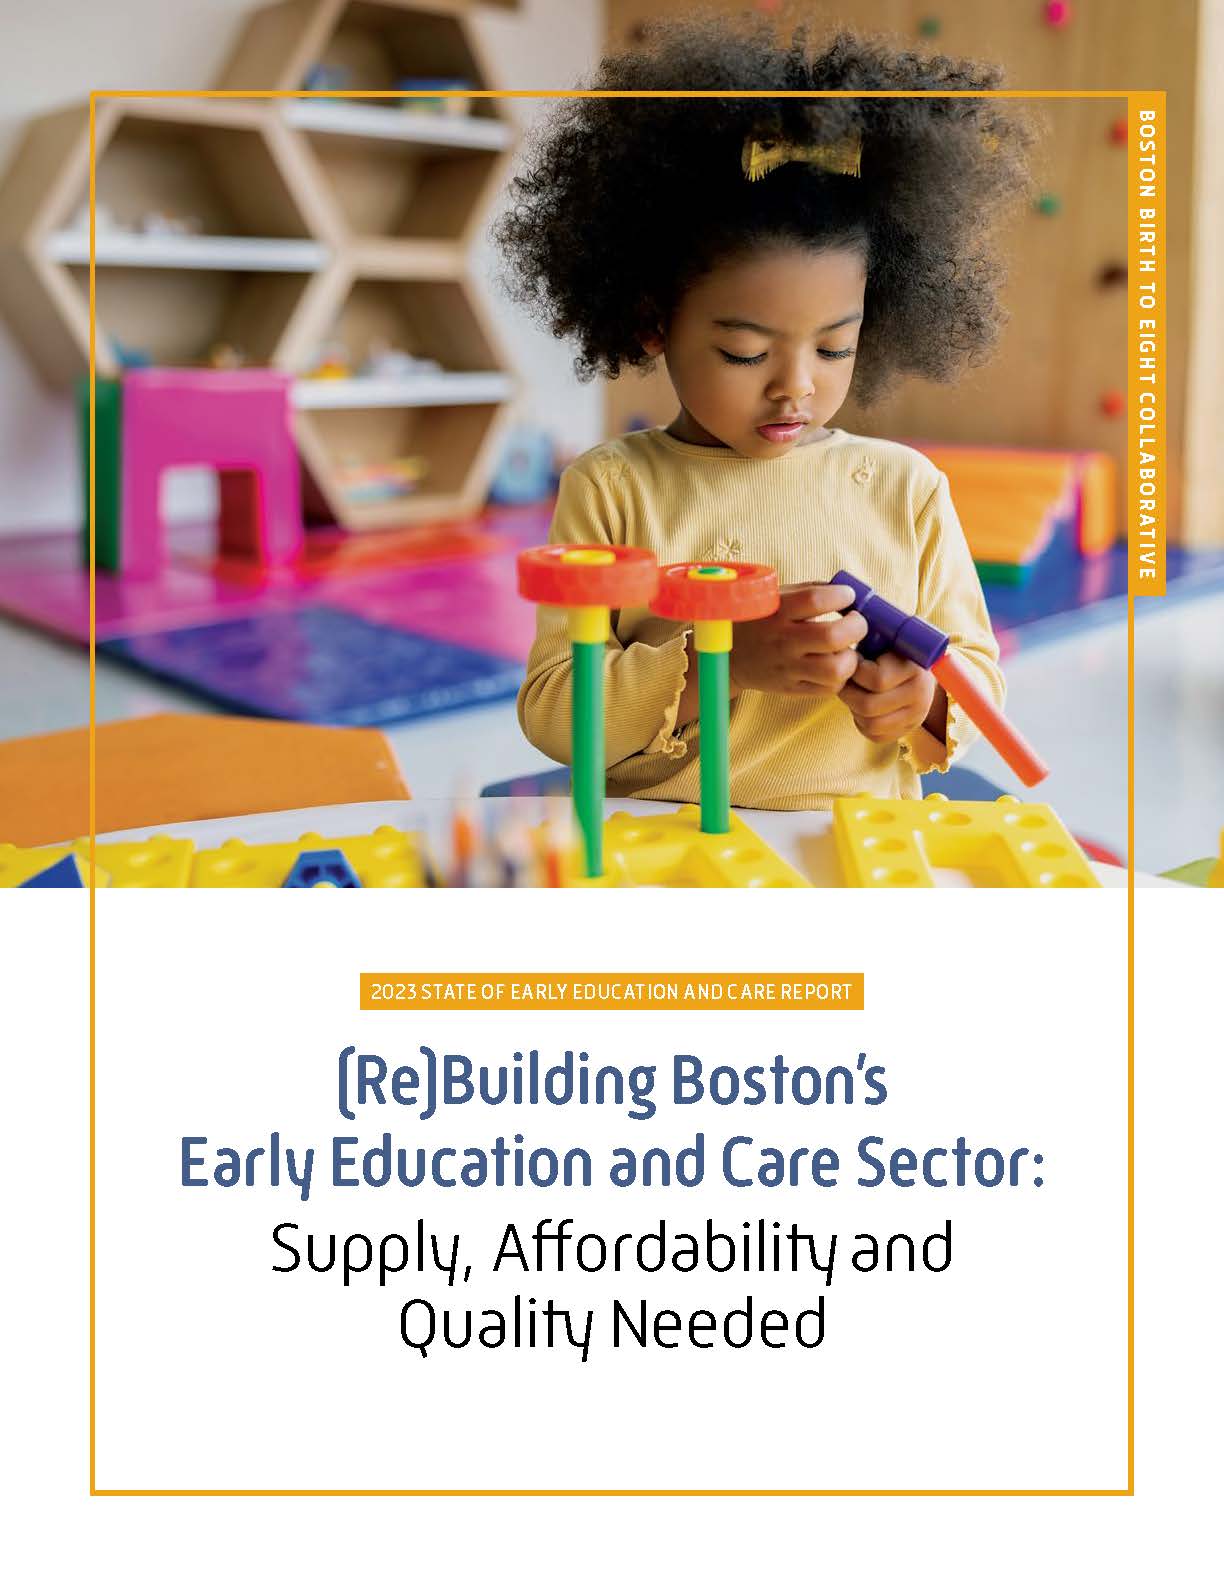 Cover photo for Boston Opportunity Agenda report titled Rebuilding Boston's Early Education and Care Sector: Supply, Affordability and Quality Needed. The cover features a photo of a young girl playing with toys